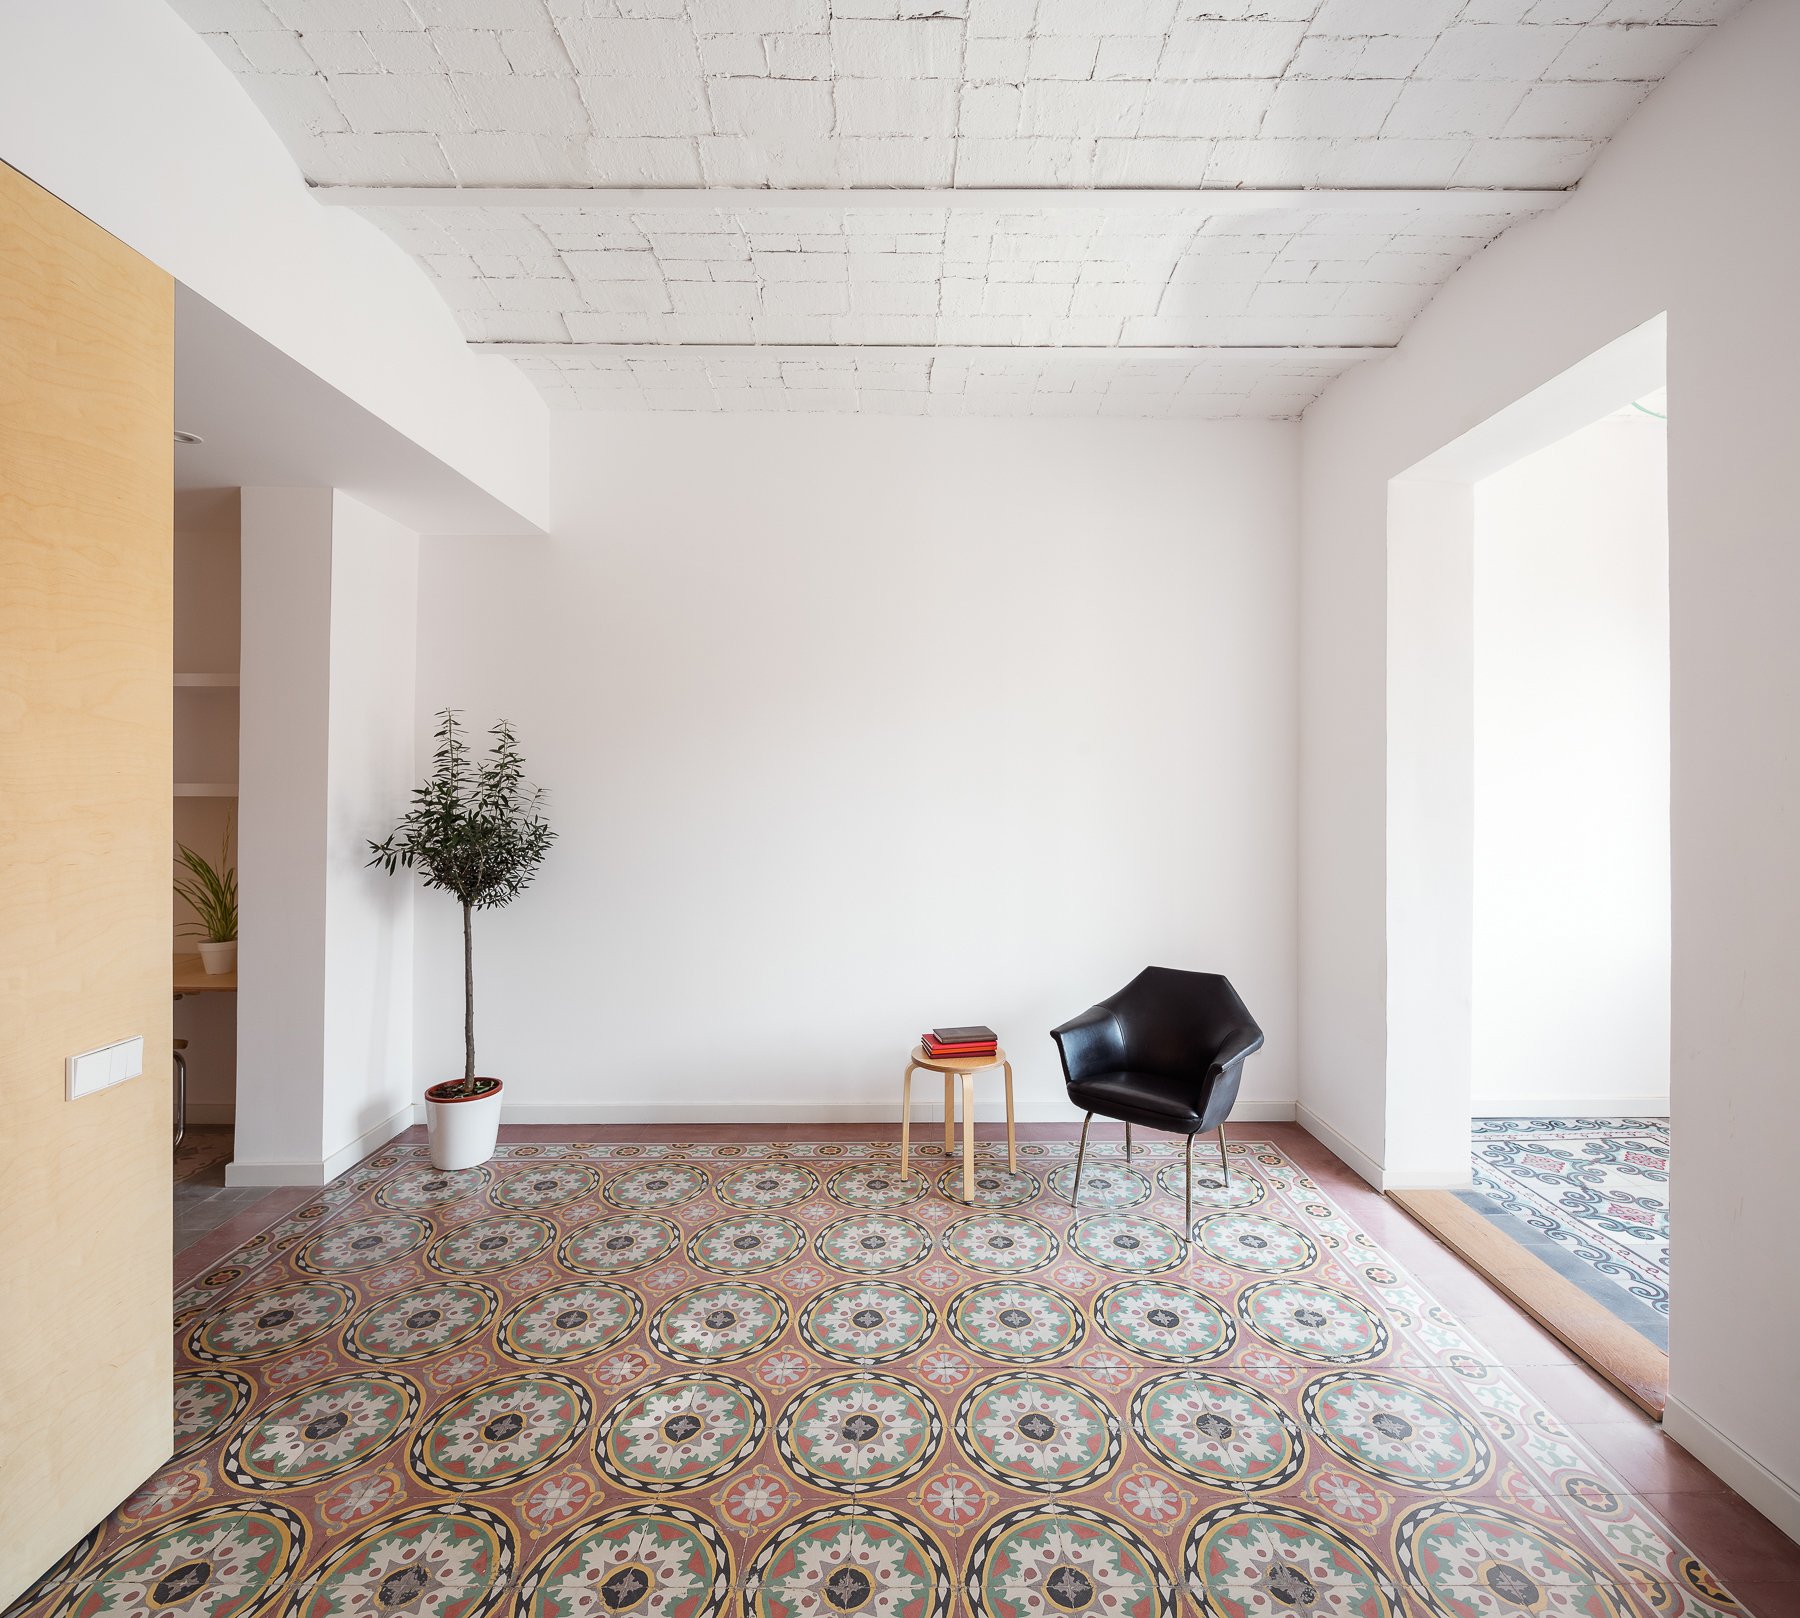 Apartment in Barcelona, Spain by Parramon + Tahull Arquitectes